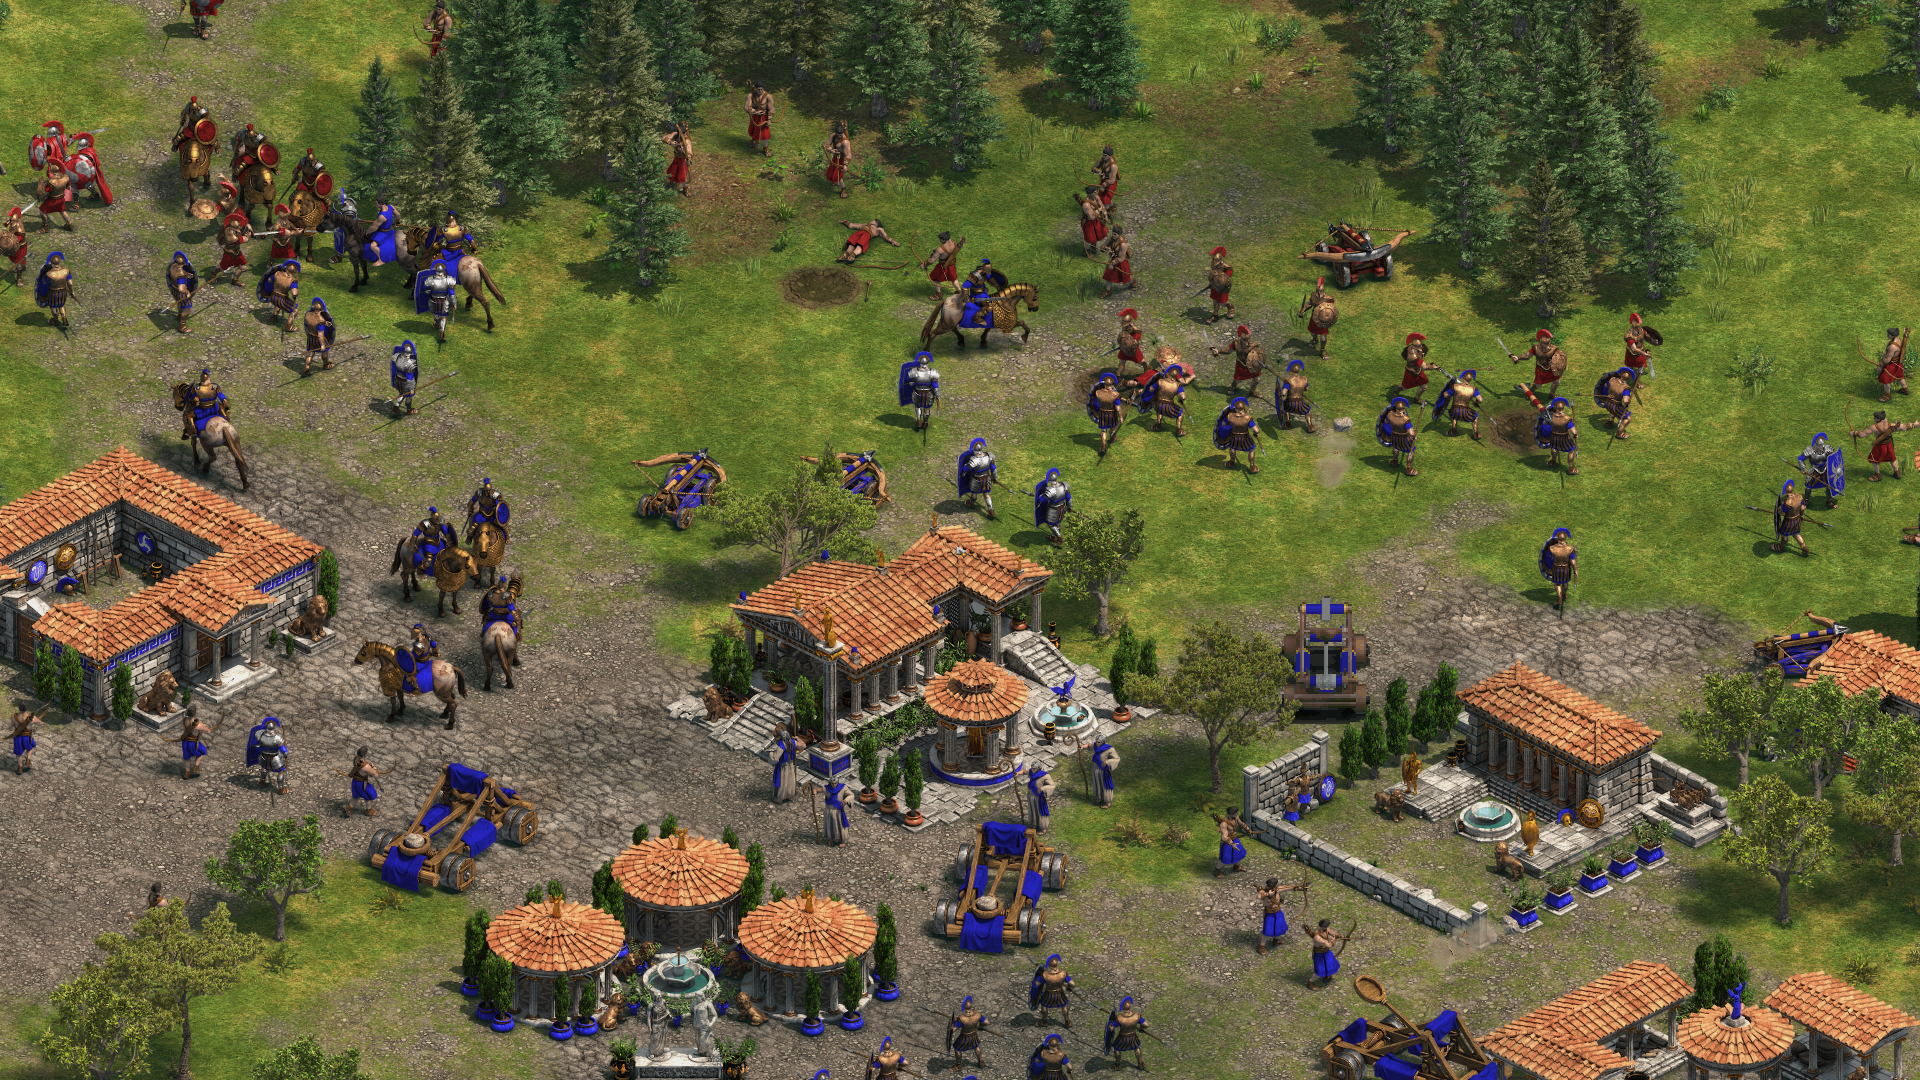 Screenshot of Age of Empires game with battling units.